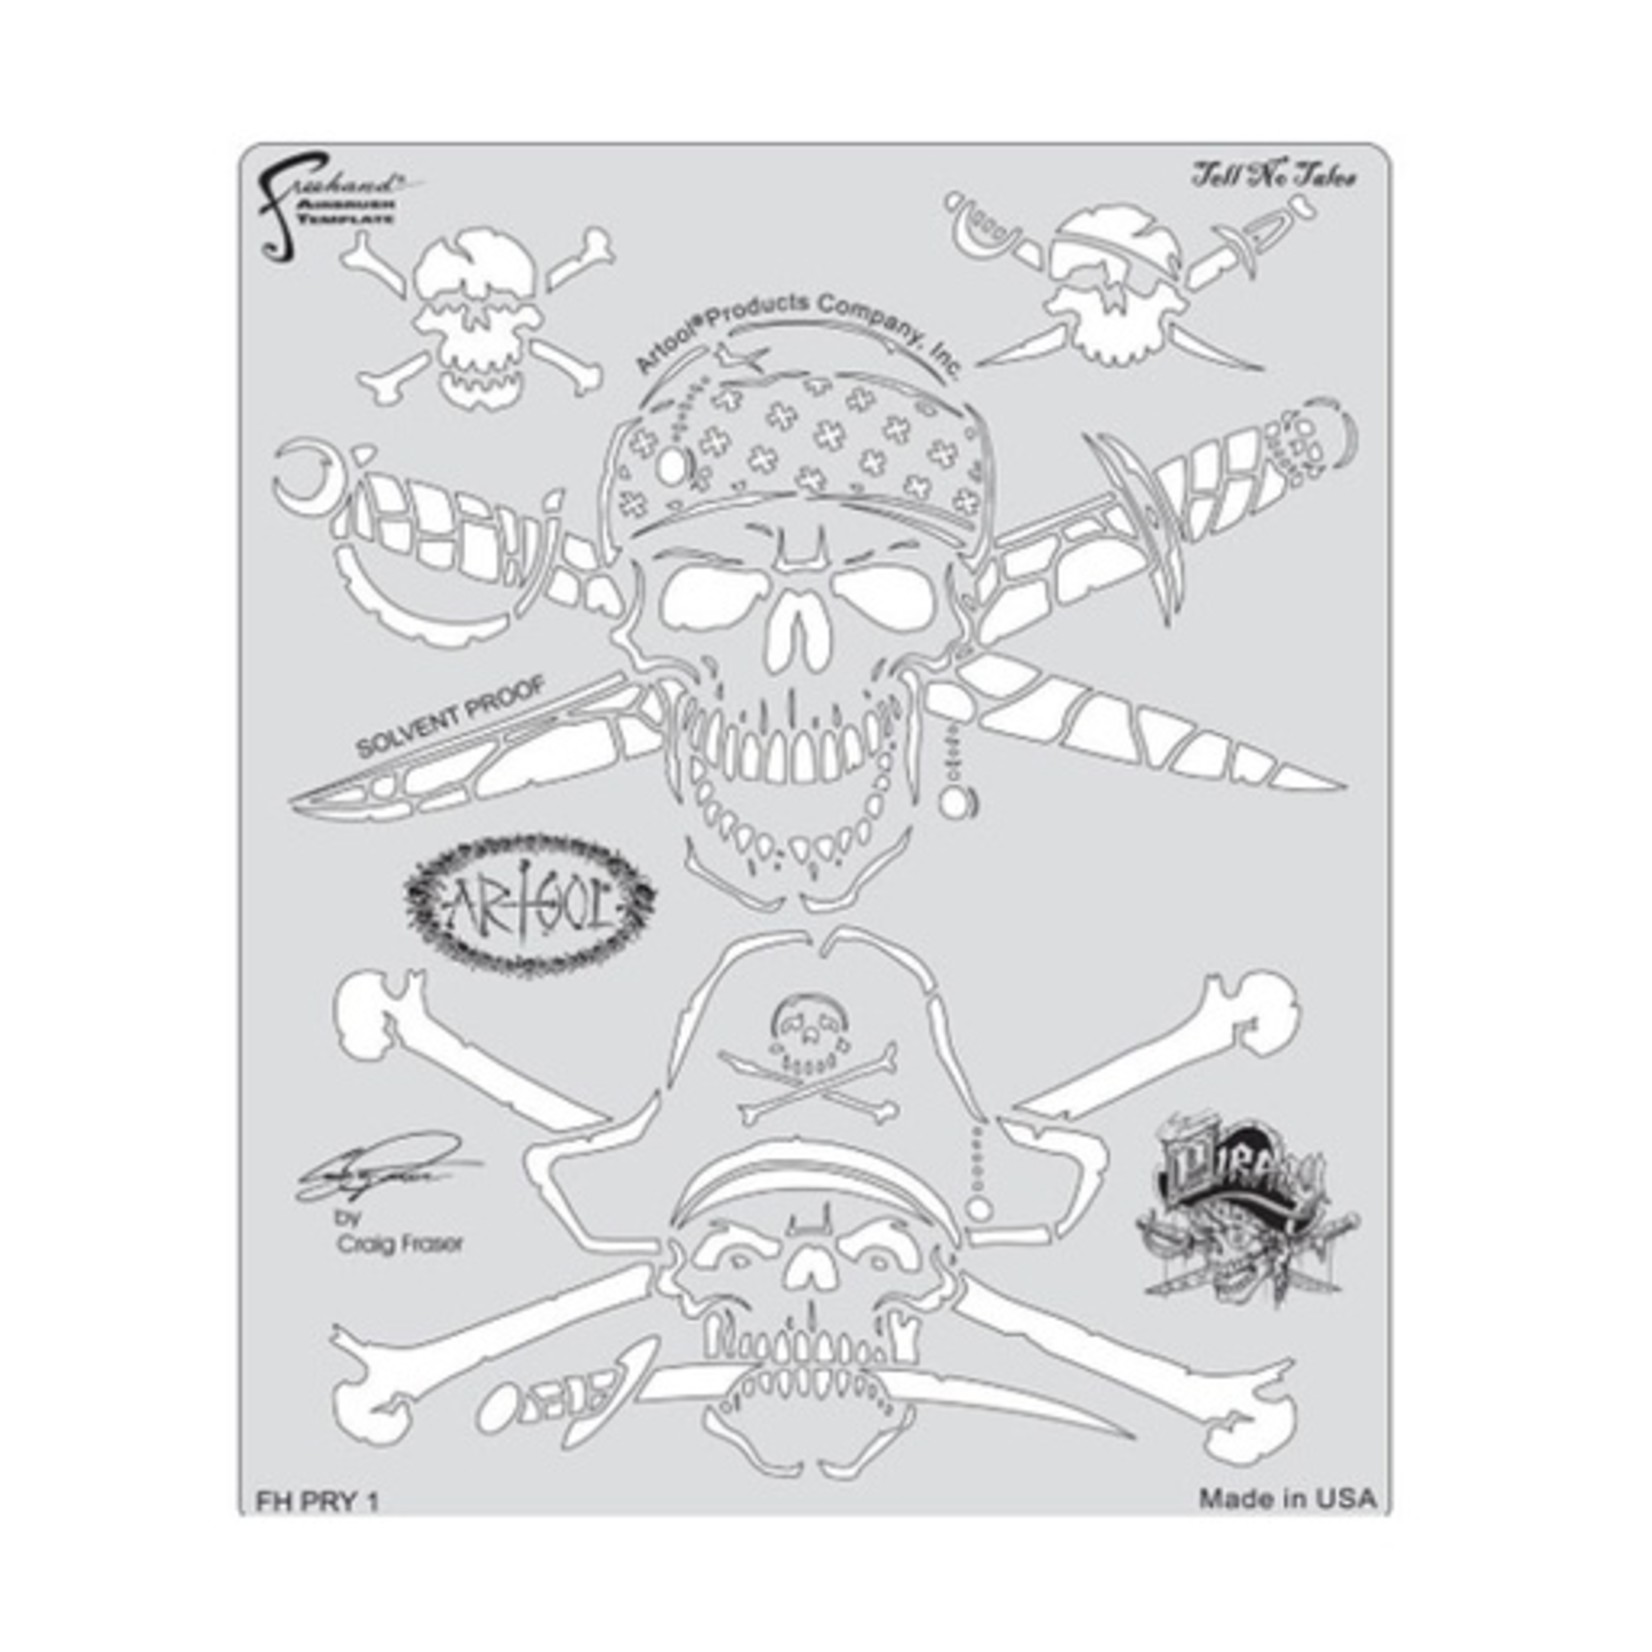 ARTOOLPRODUCTS ARTOOL FREEHAND AIRBRUSH TEMPLATE PRY1 TELL NO TALES